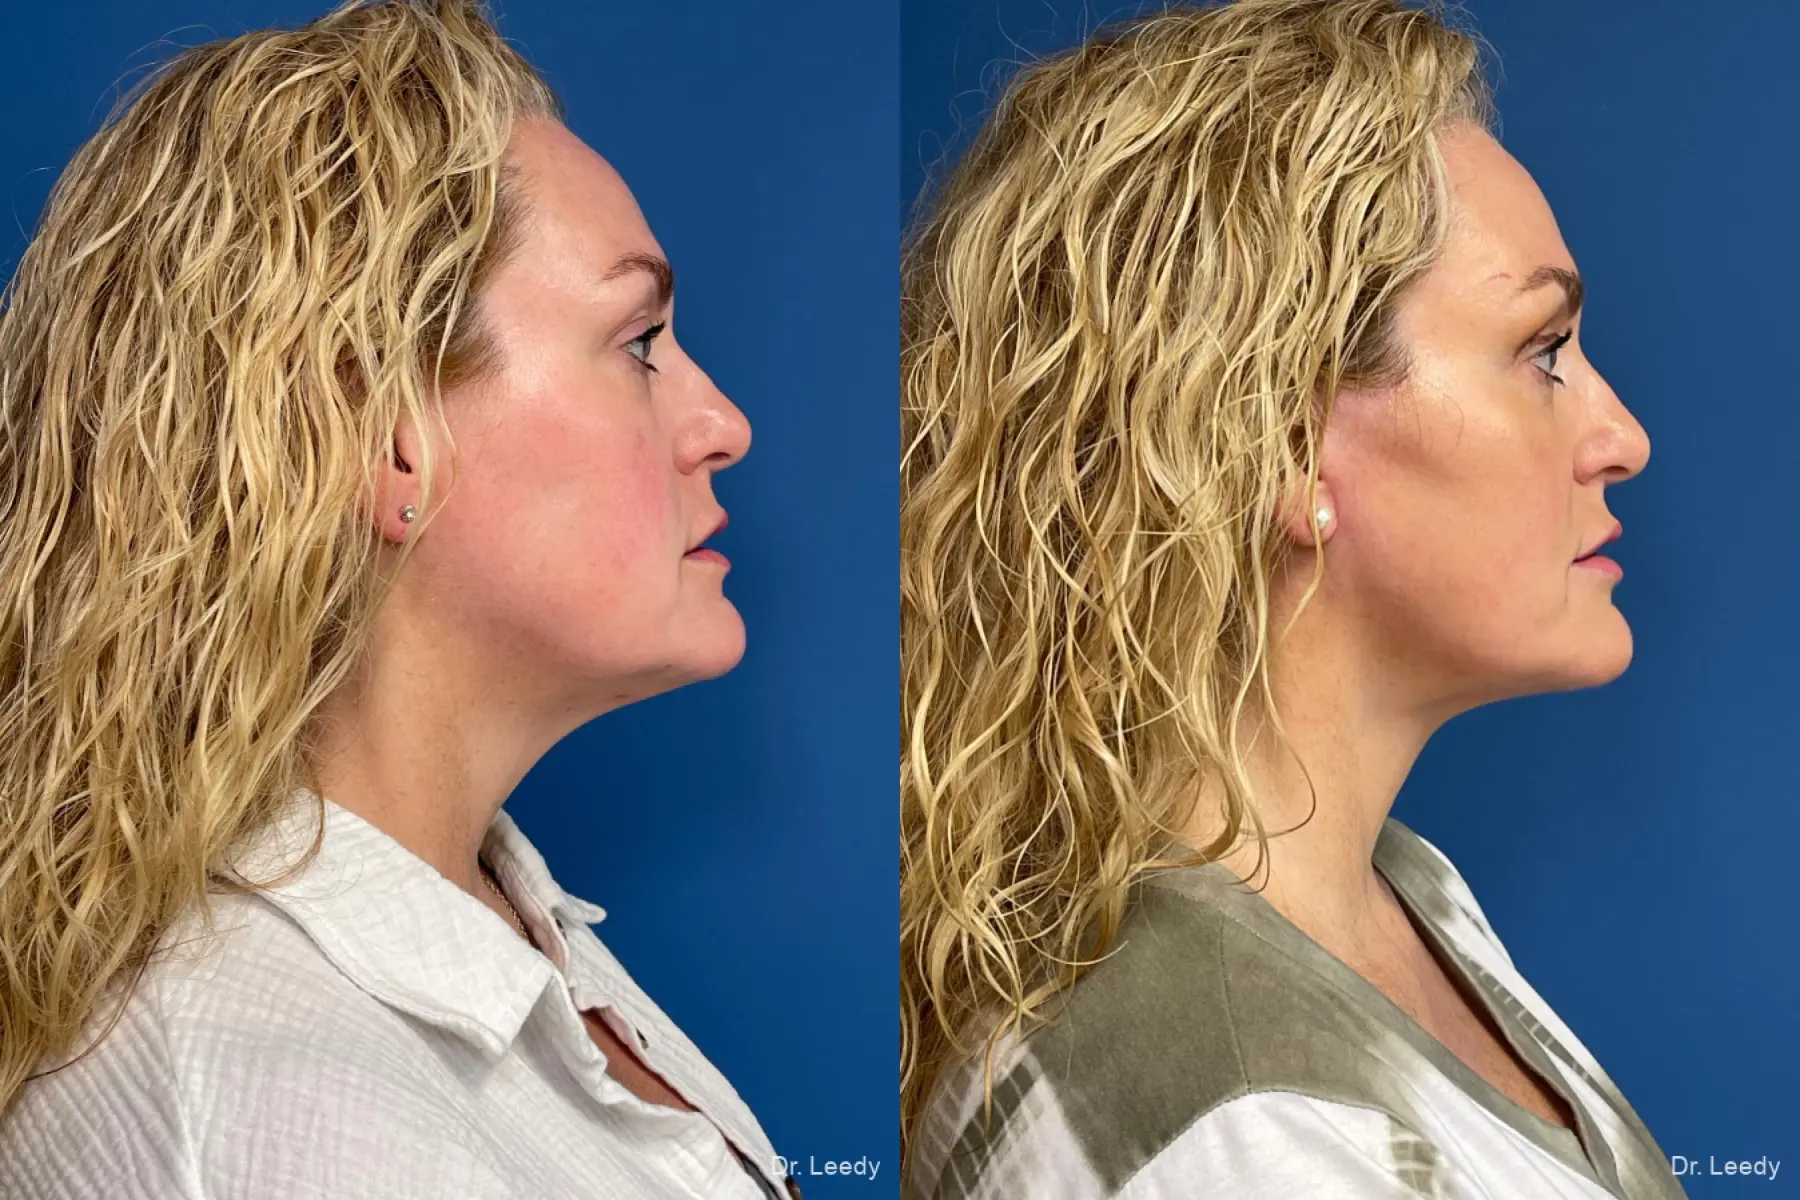 Facelift & Neck Lift: Patient 2 - Before and After 3